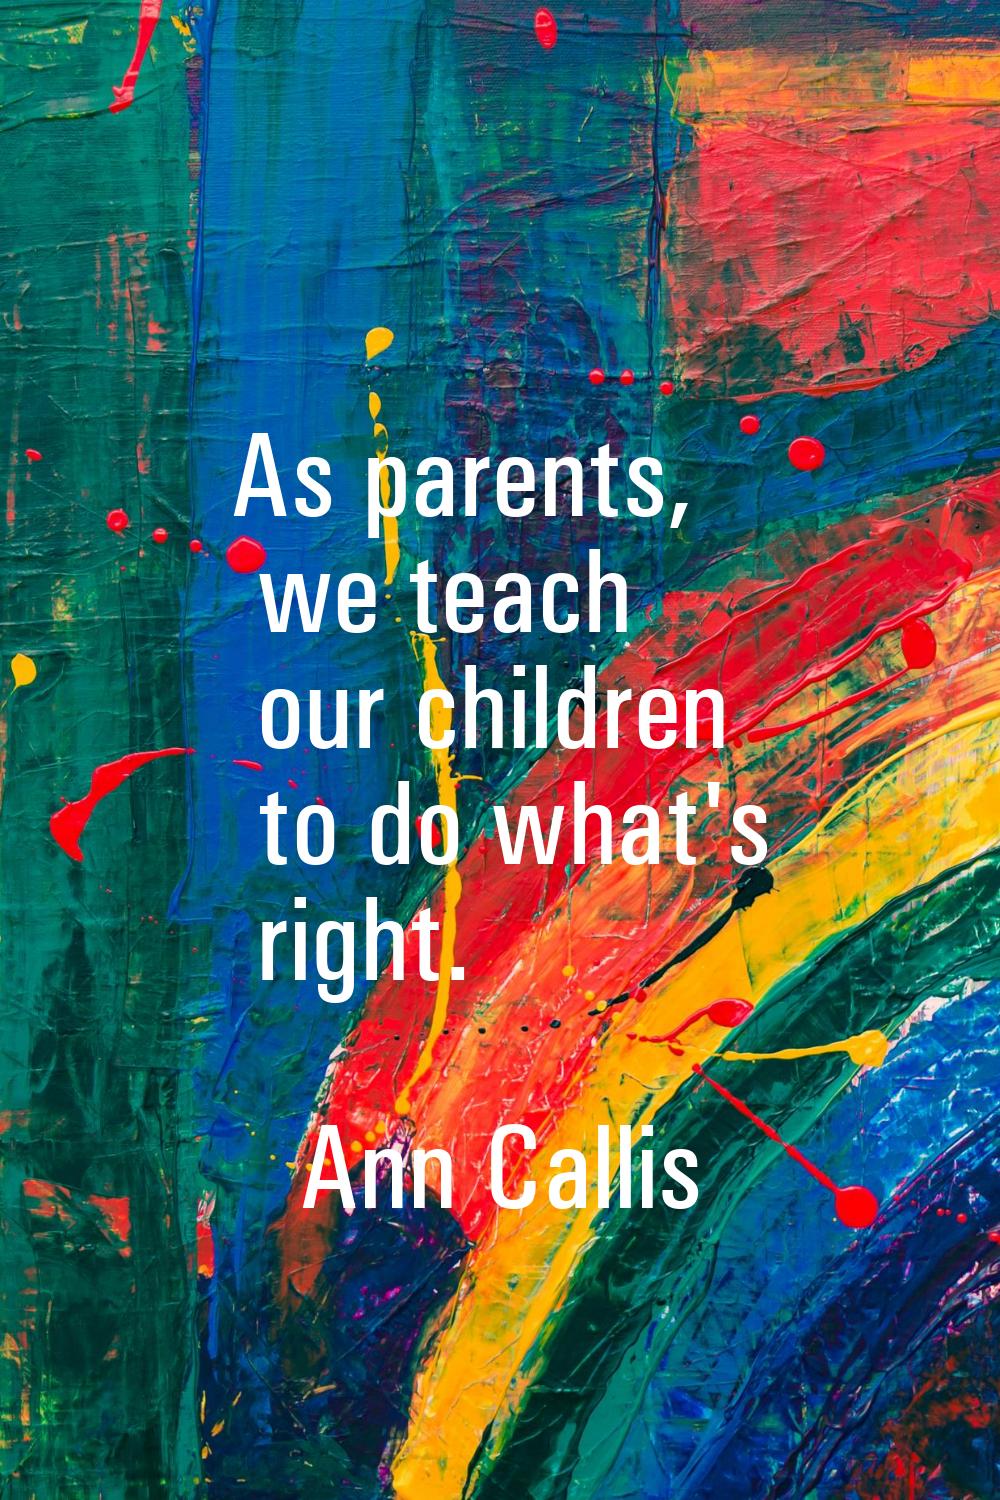 As parents, we teach our children to do what's right.